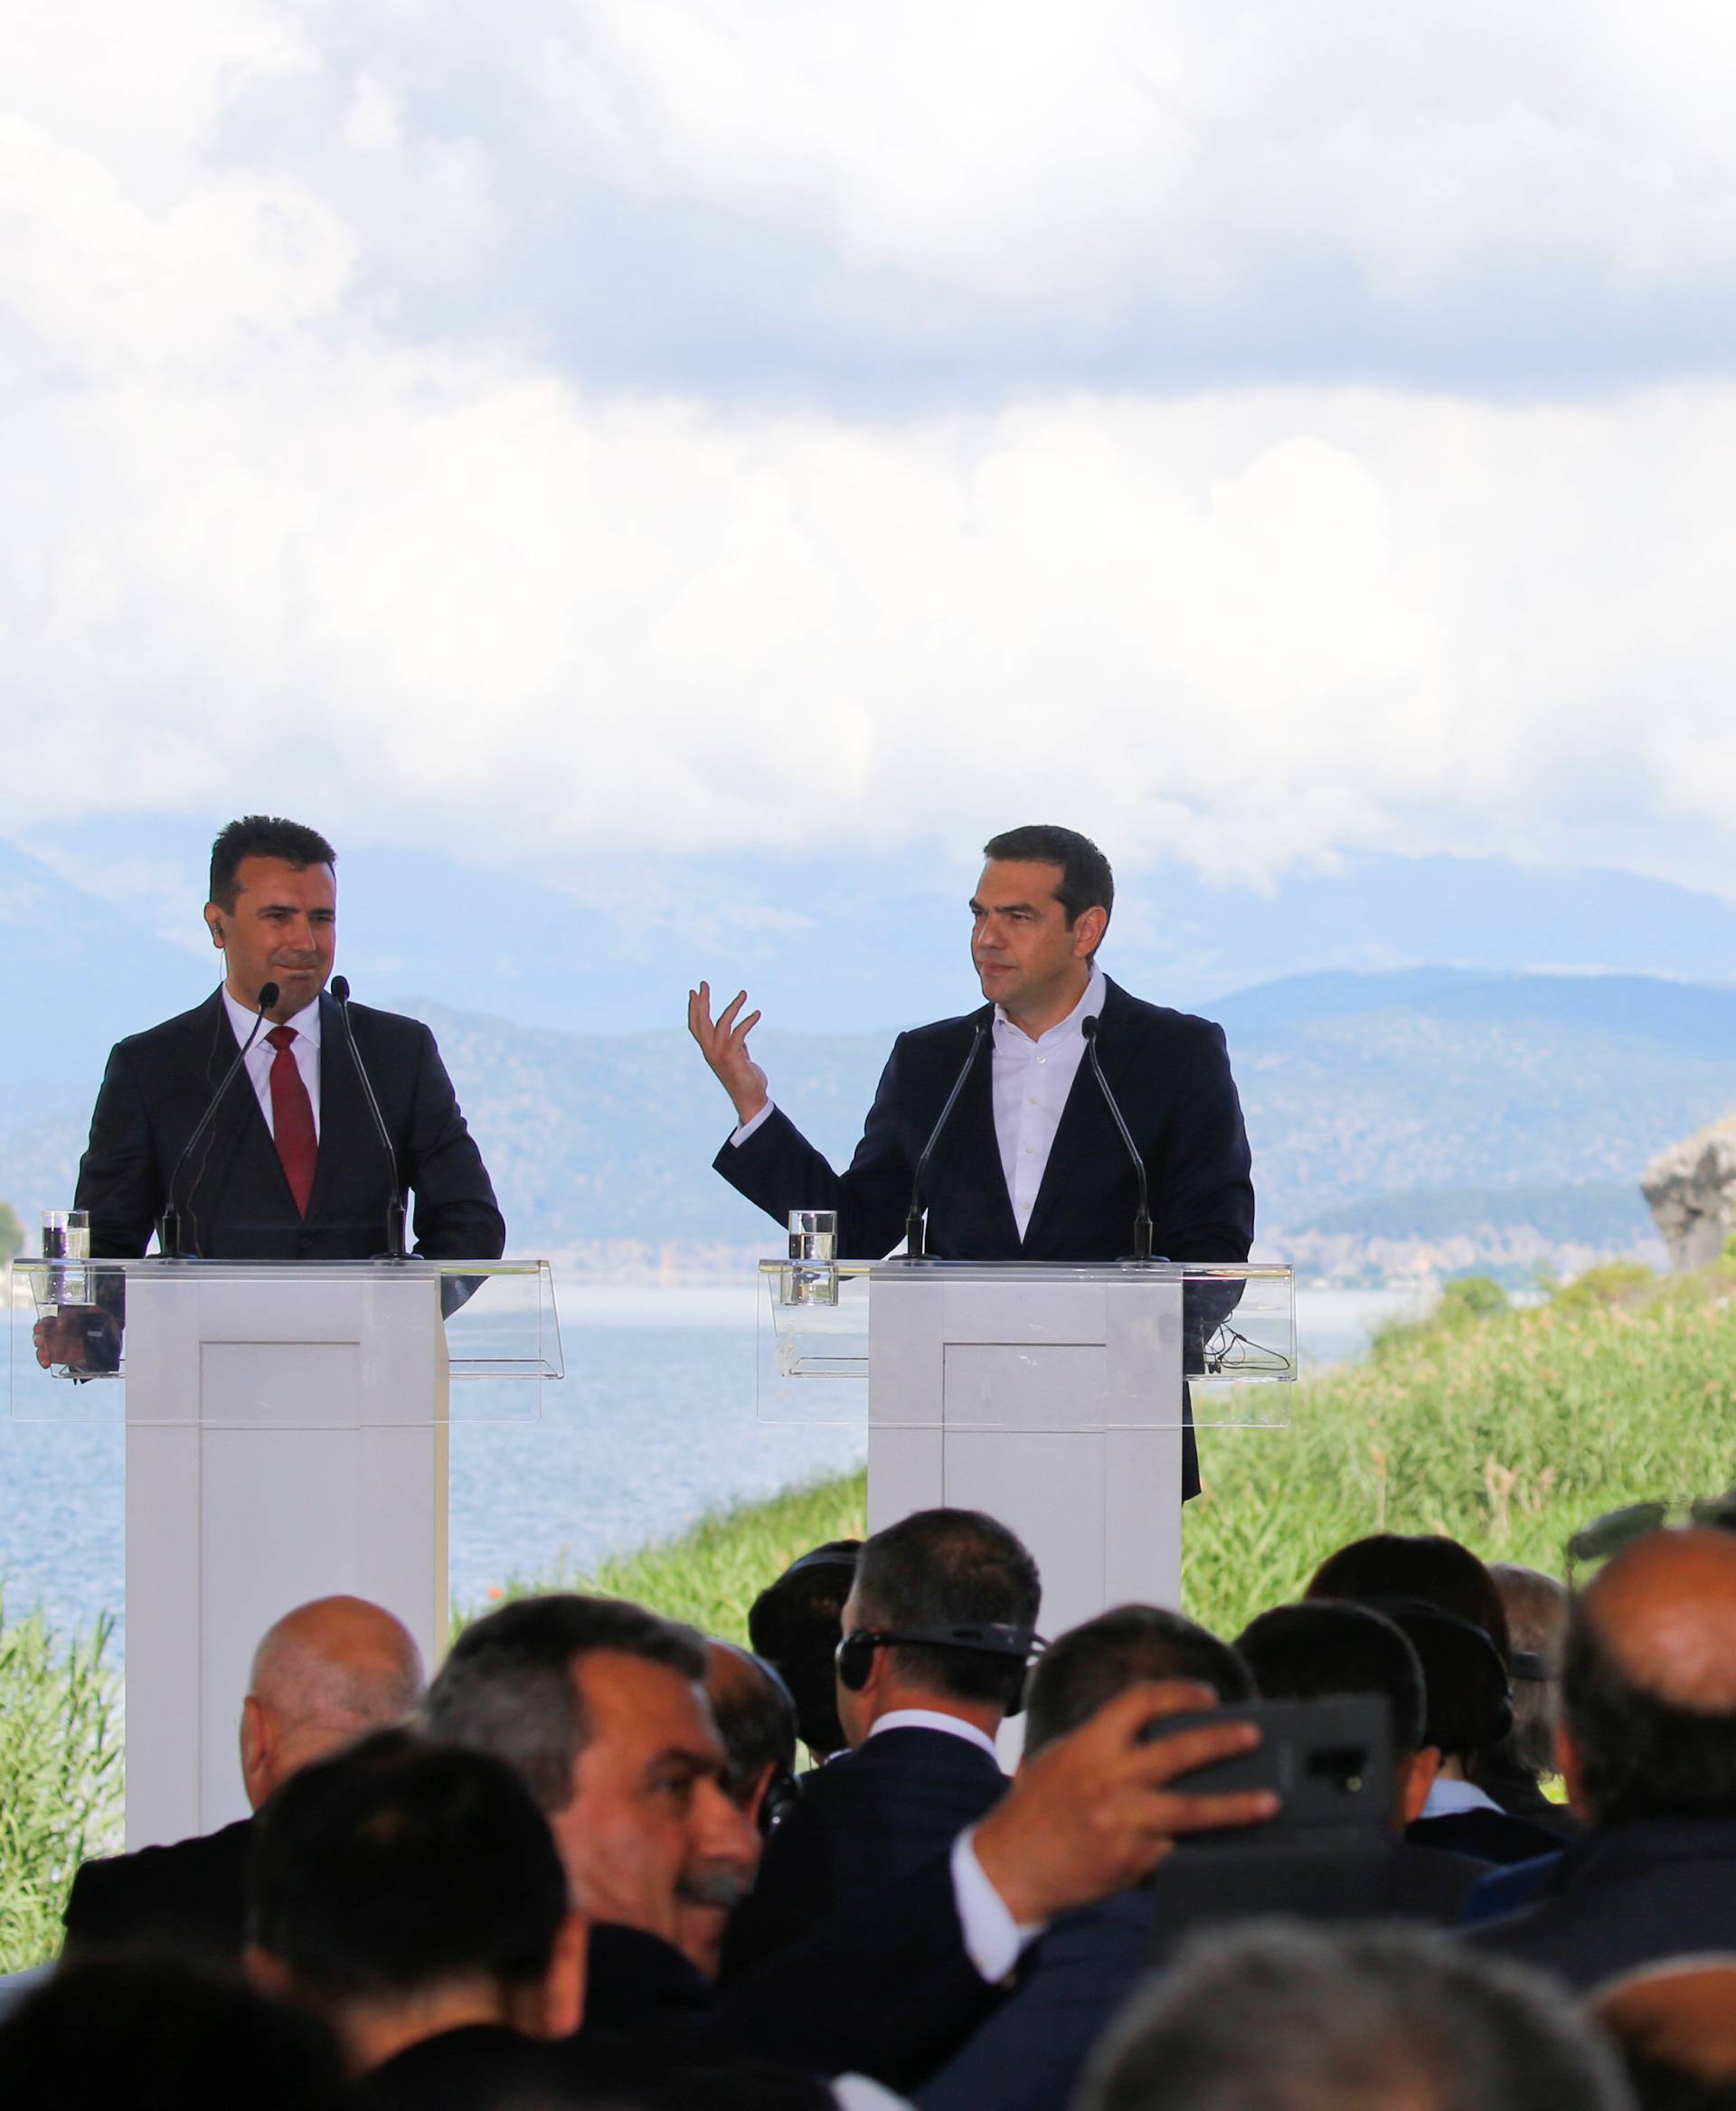 Greek Prime Minister Alexis Tsipras and Macedonian Prime Minister Zoran Zaev speak before the signing of an accord to settle a long dispute over the former Yugoslav republic's name in the village of Psarades